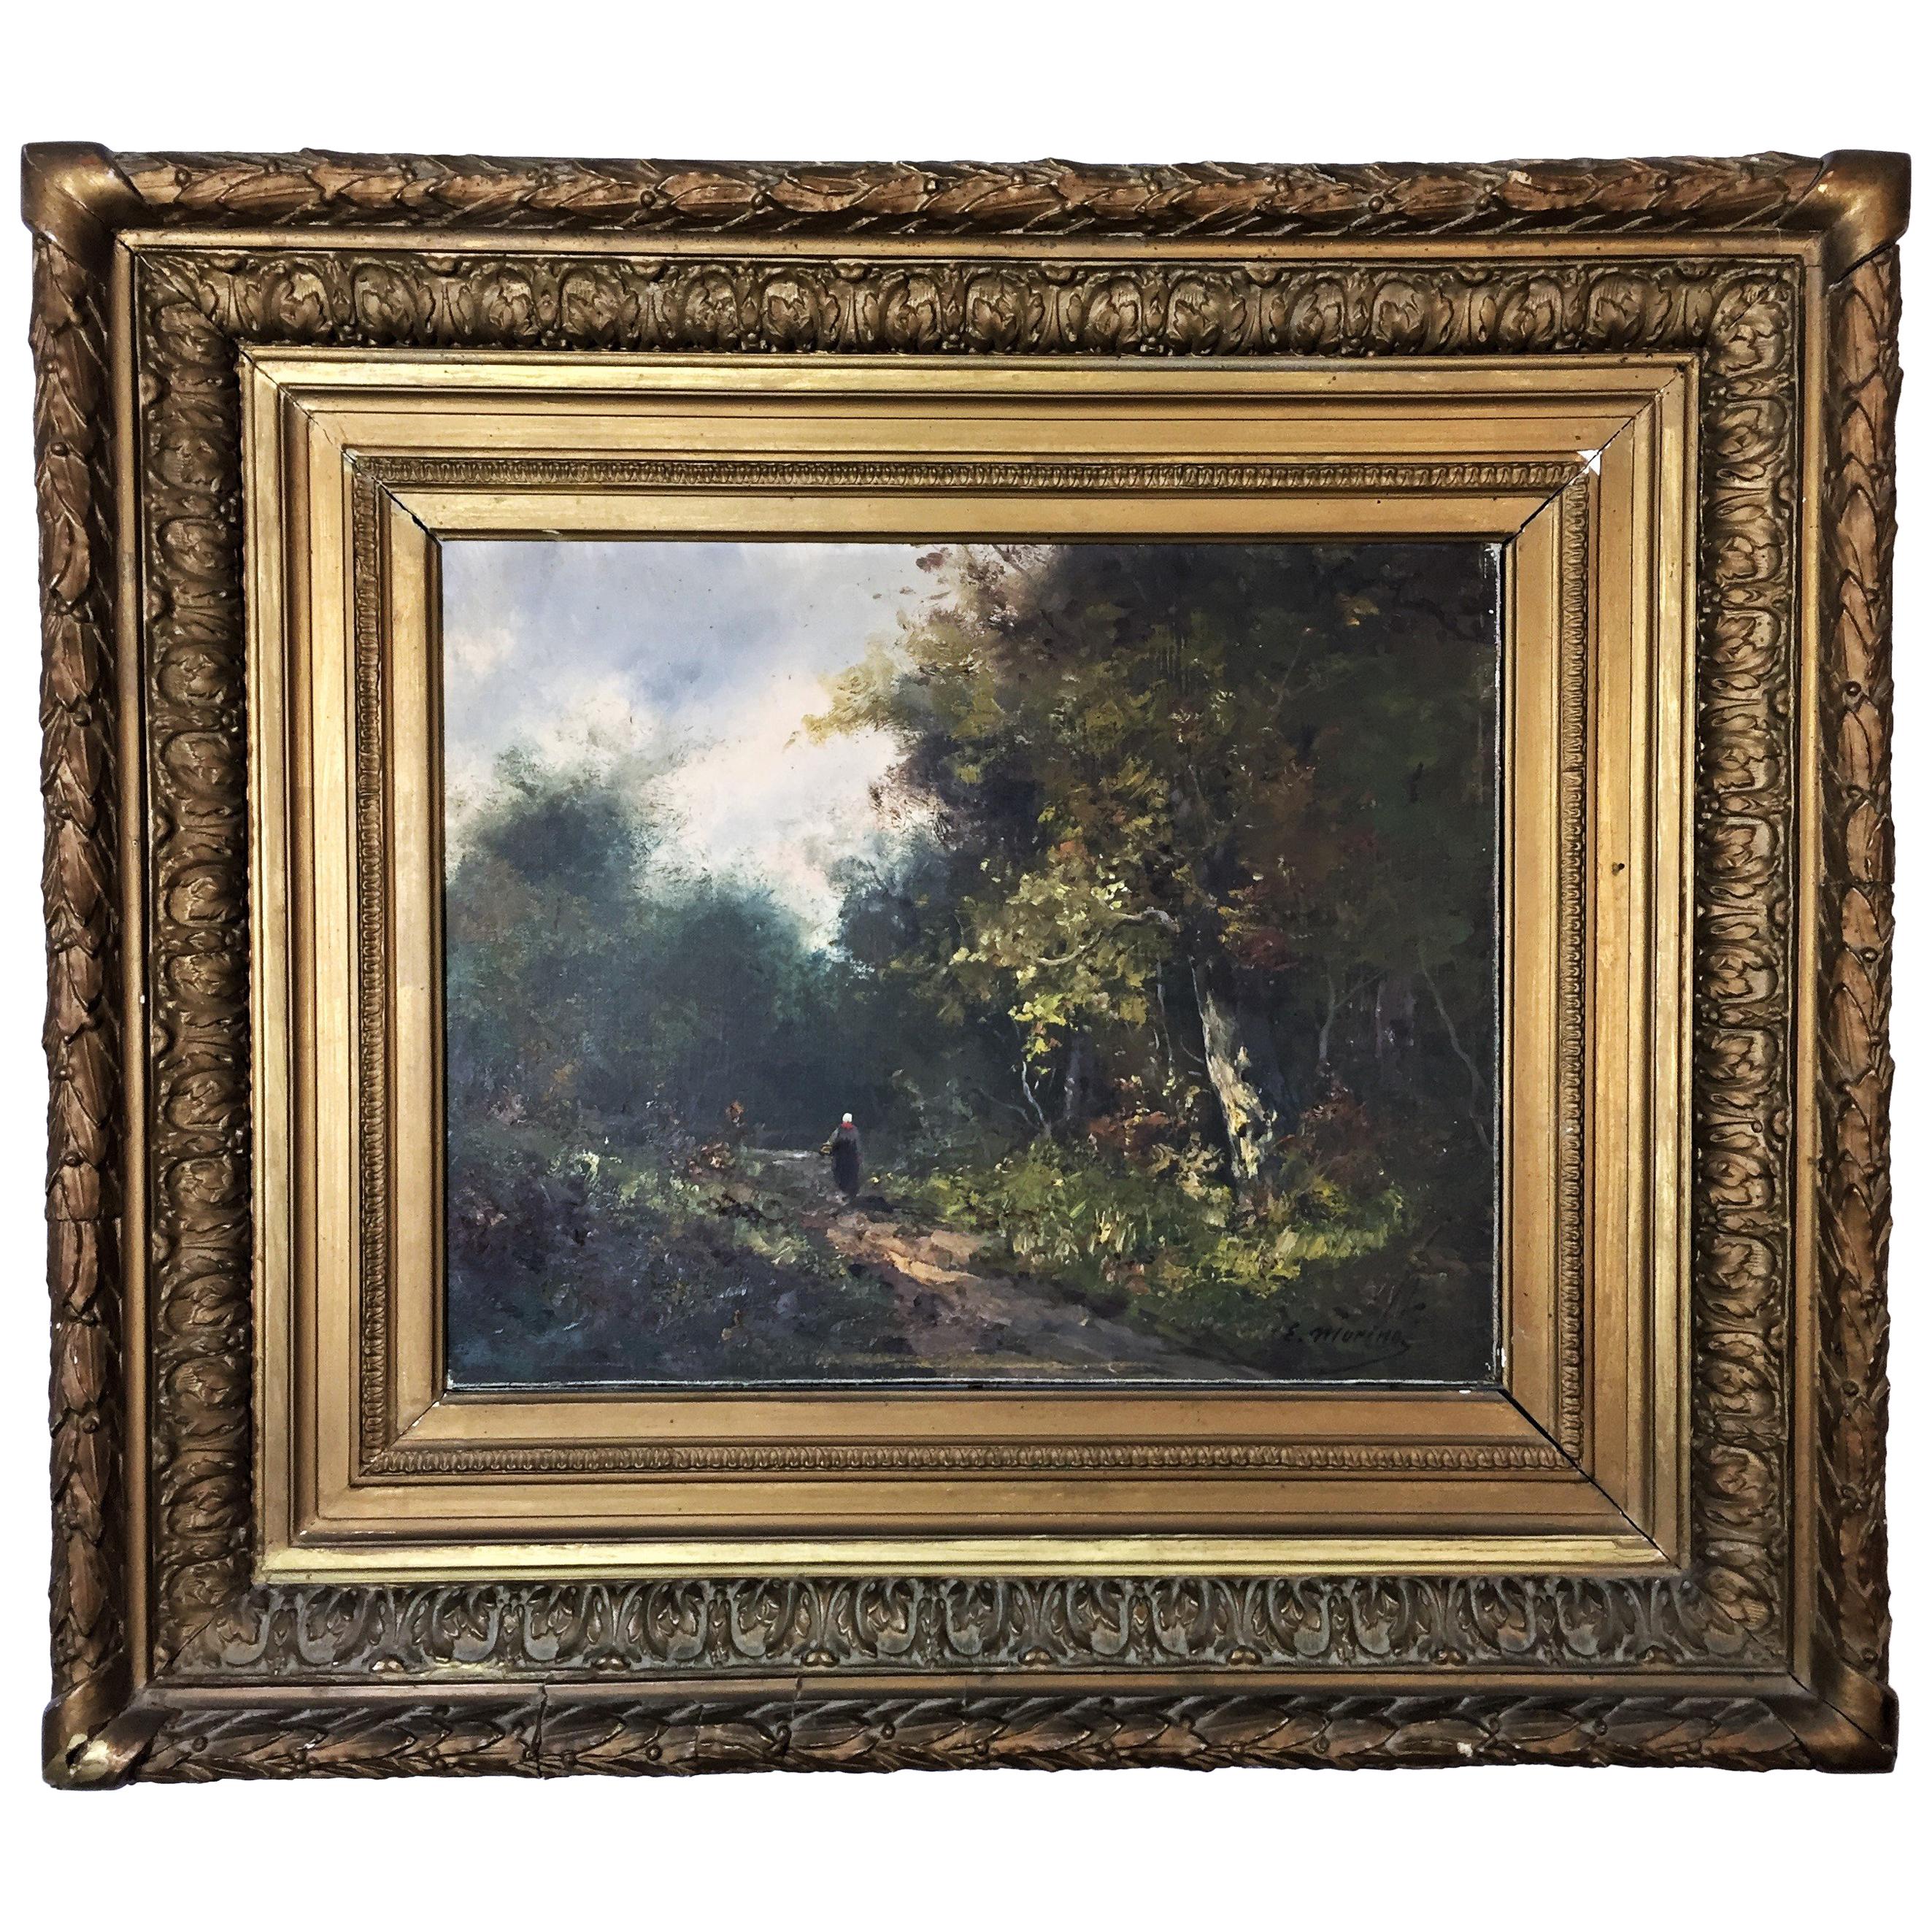 Very nice pair of oil on canvas depicting animated countryside landscapes.
signed by Edmund Pick Morino, Early 20th Century Artist.
Beautiful landscapes of nature, which gives a feeling of tranquility.
Beautiful landscapes of nature, which gives a